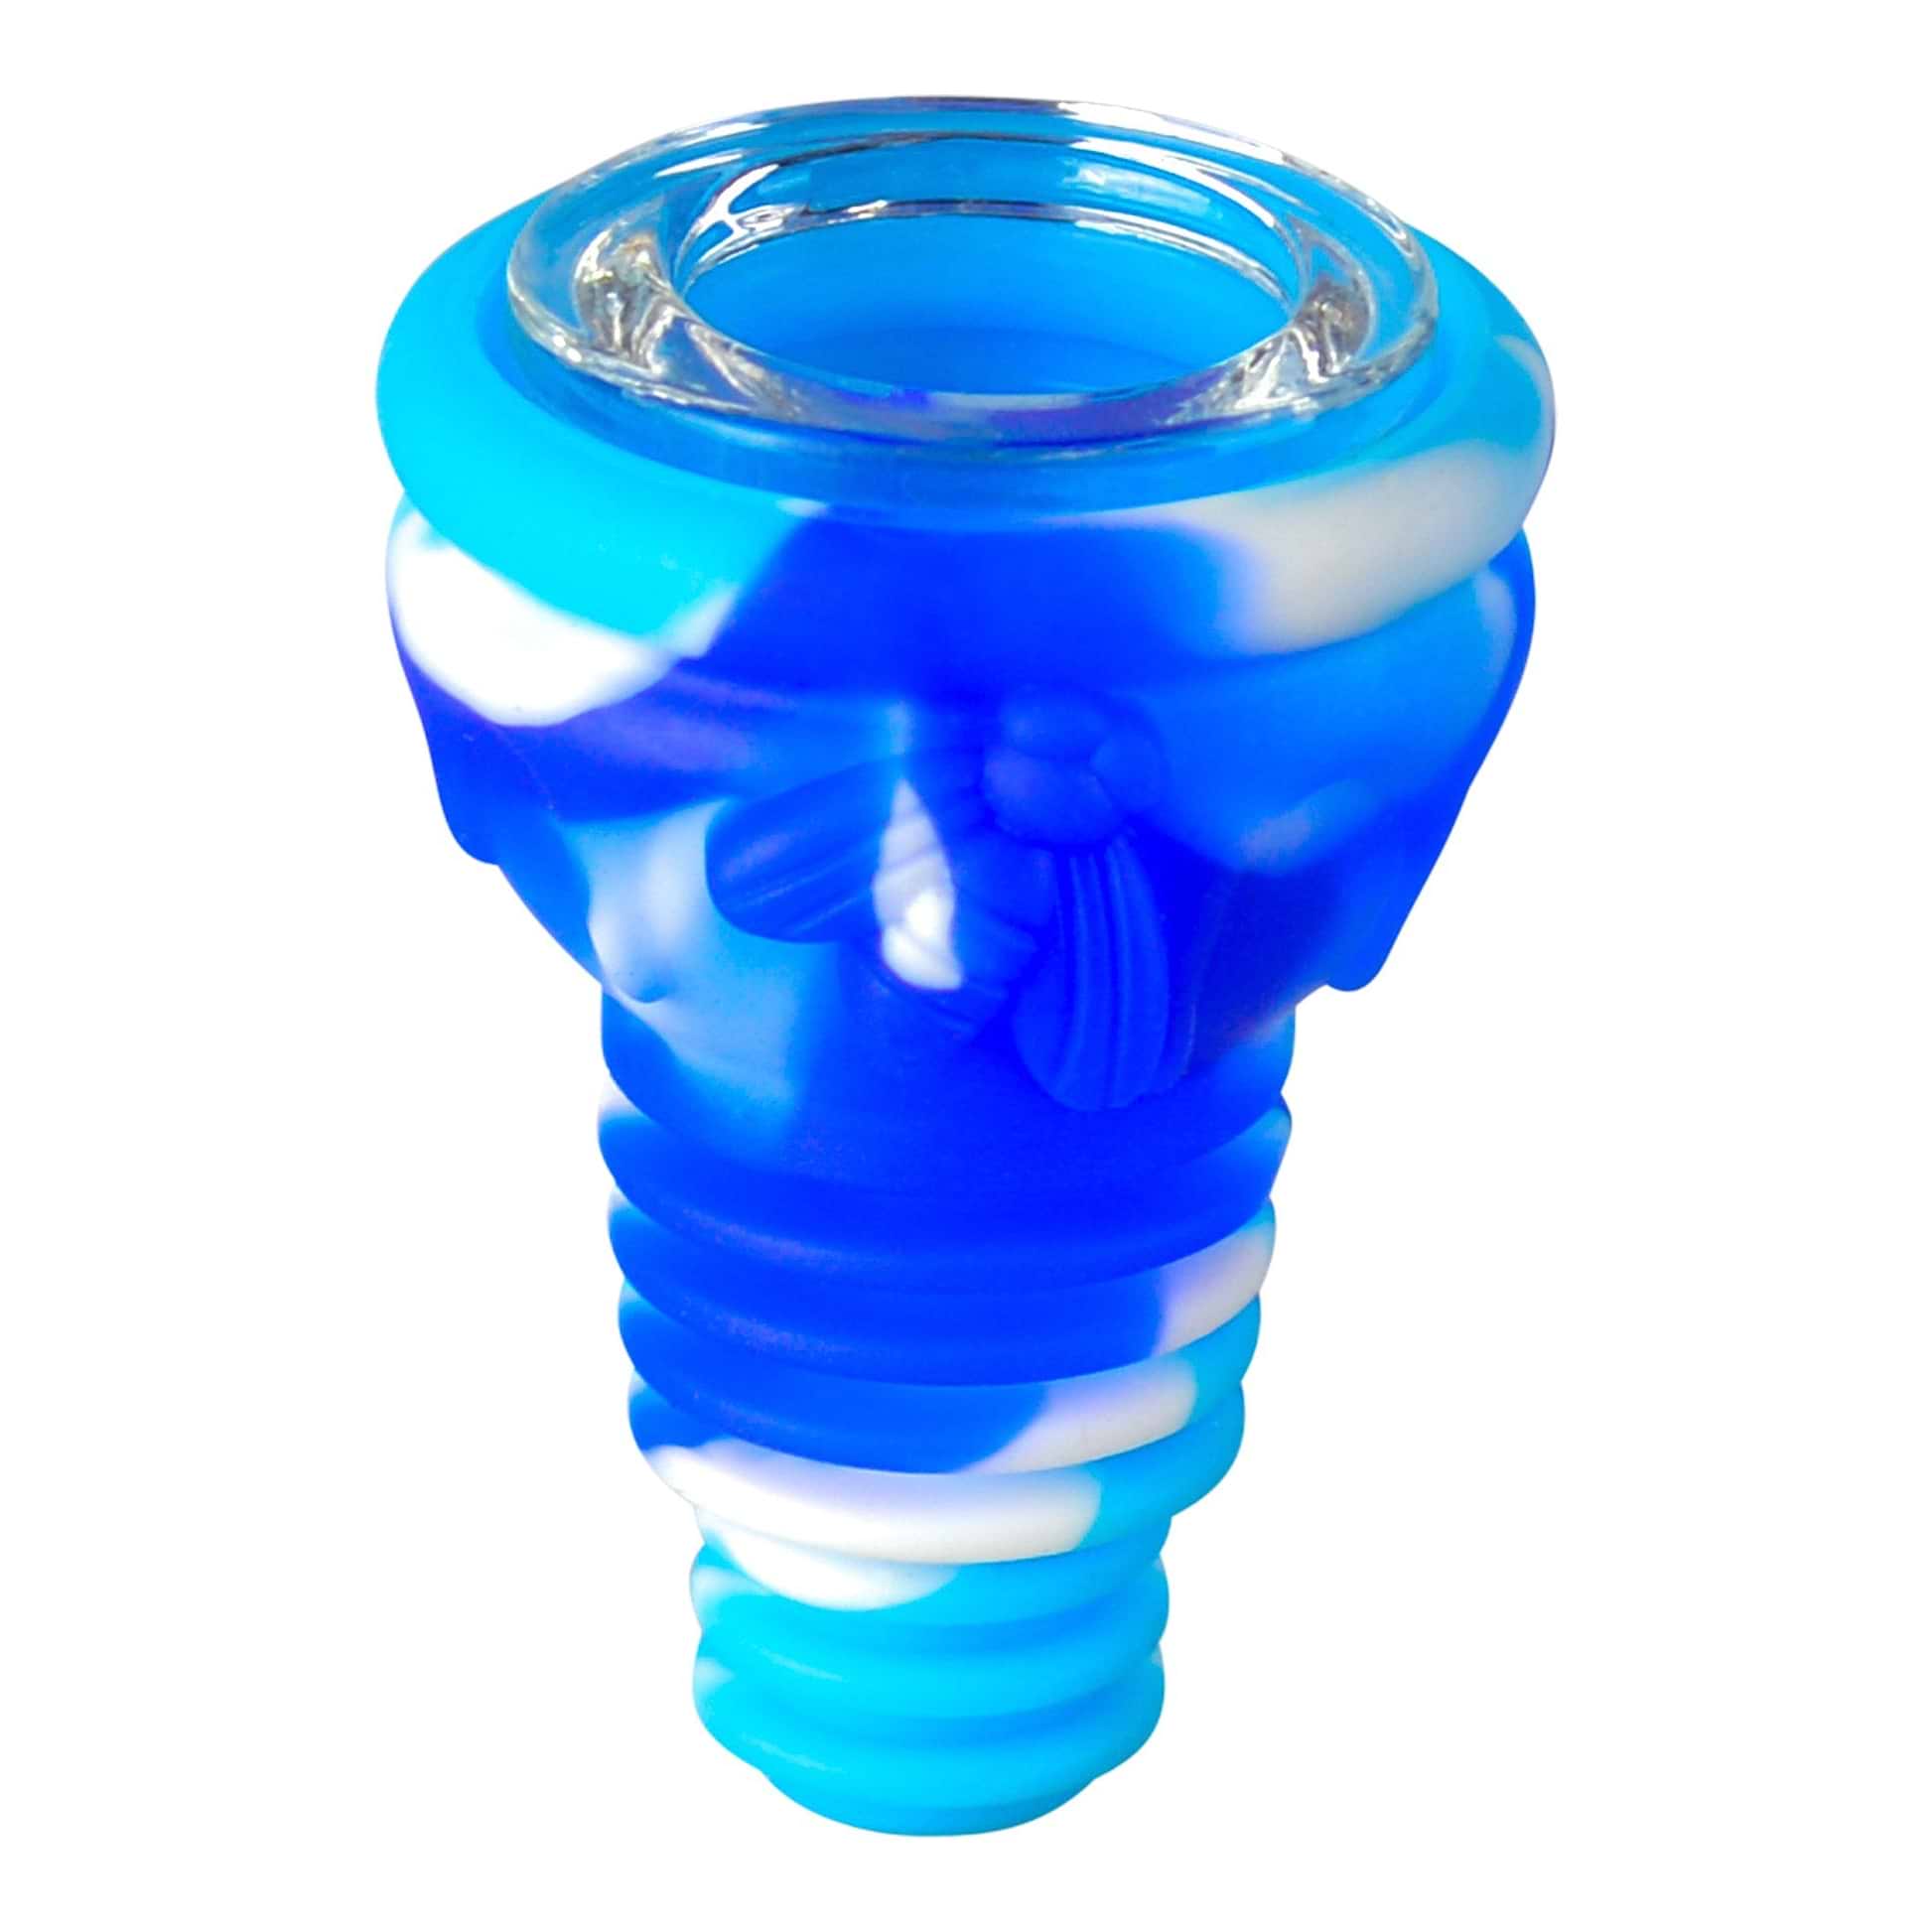 Honeybee Silicone Bowl - Male Blue